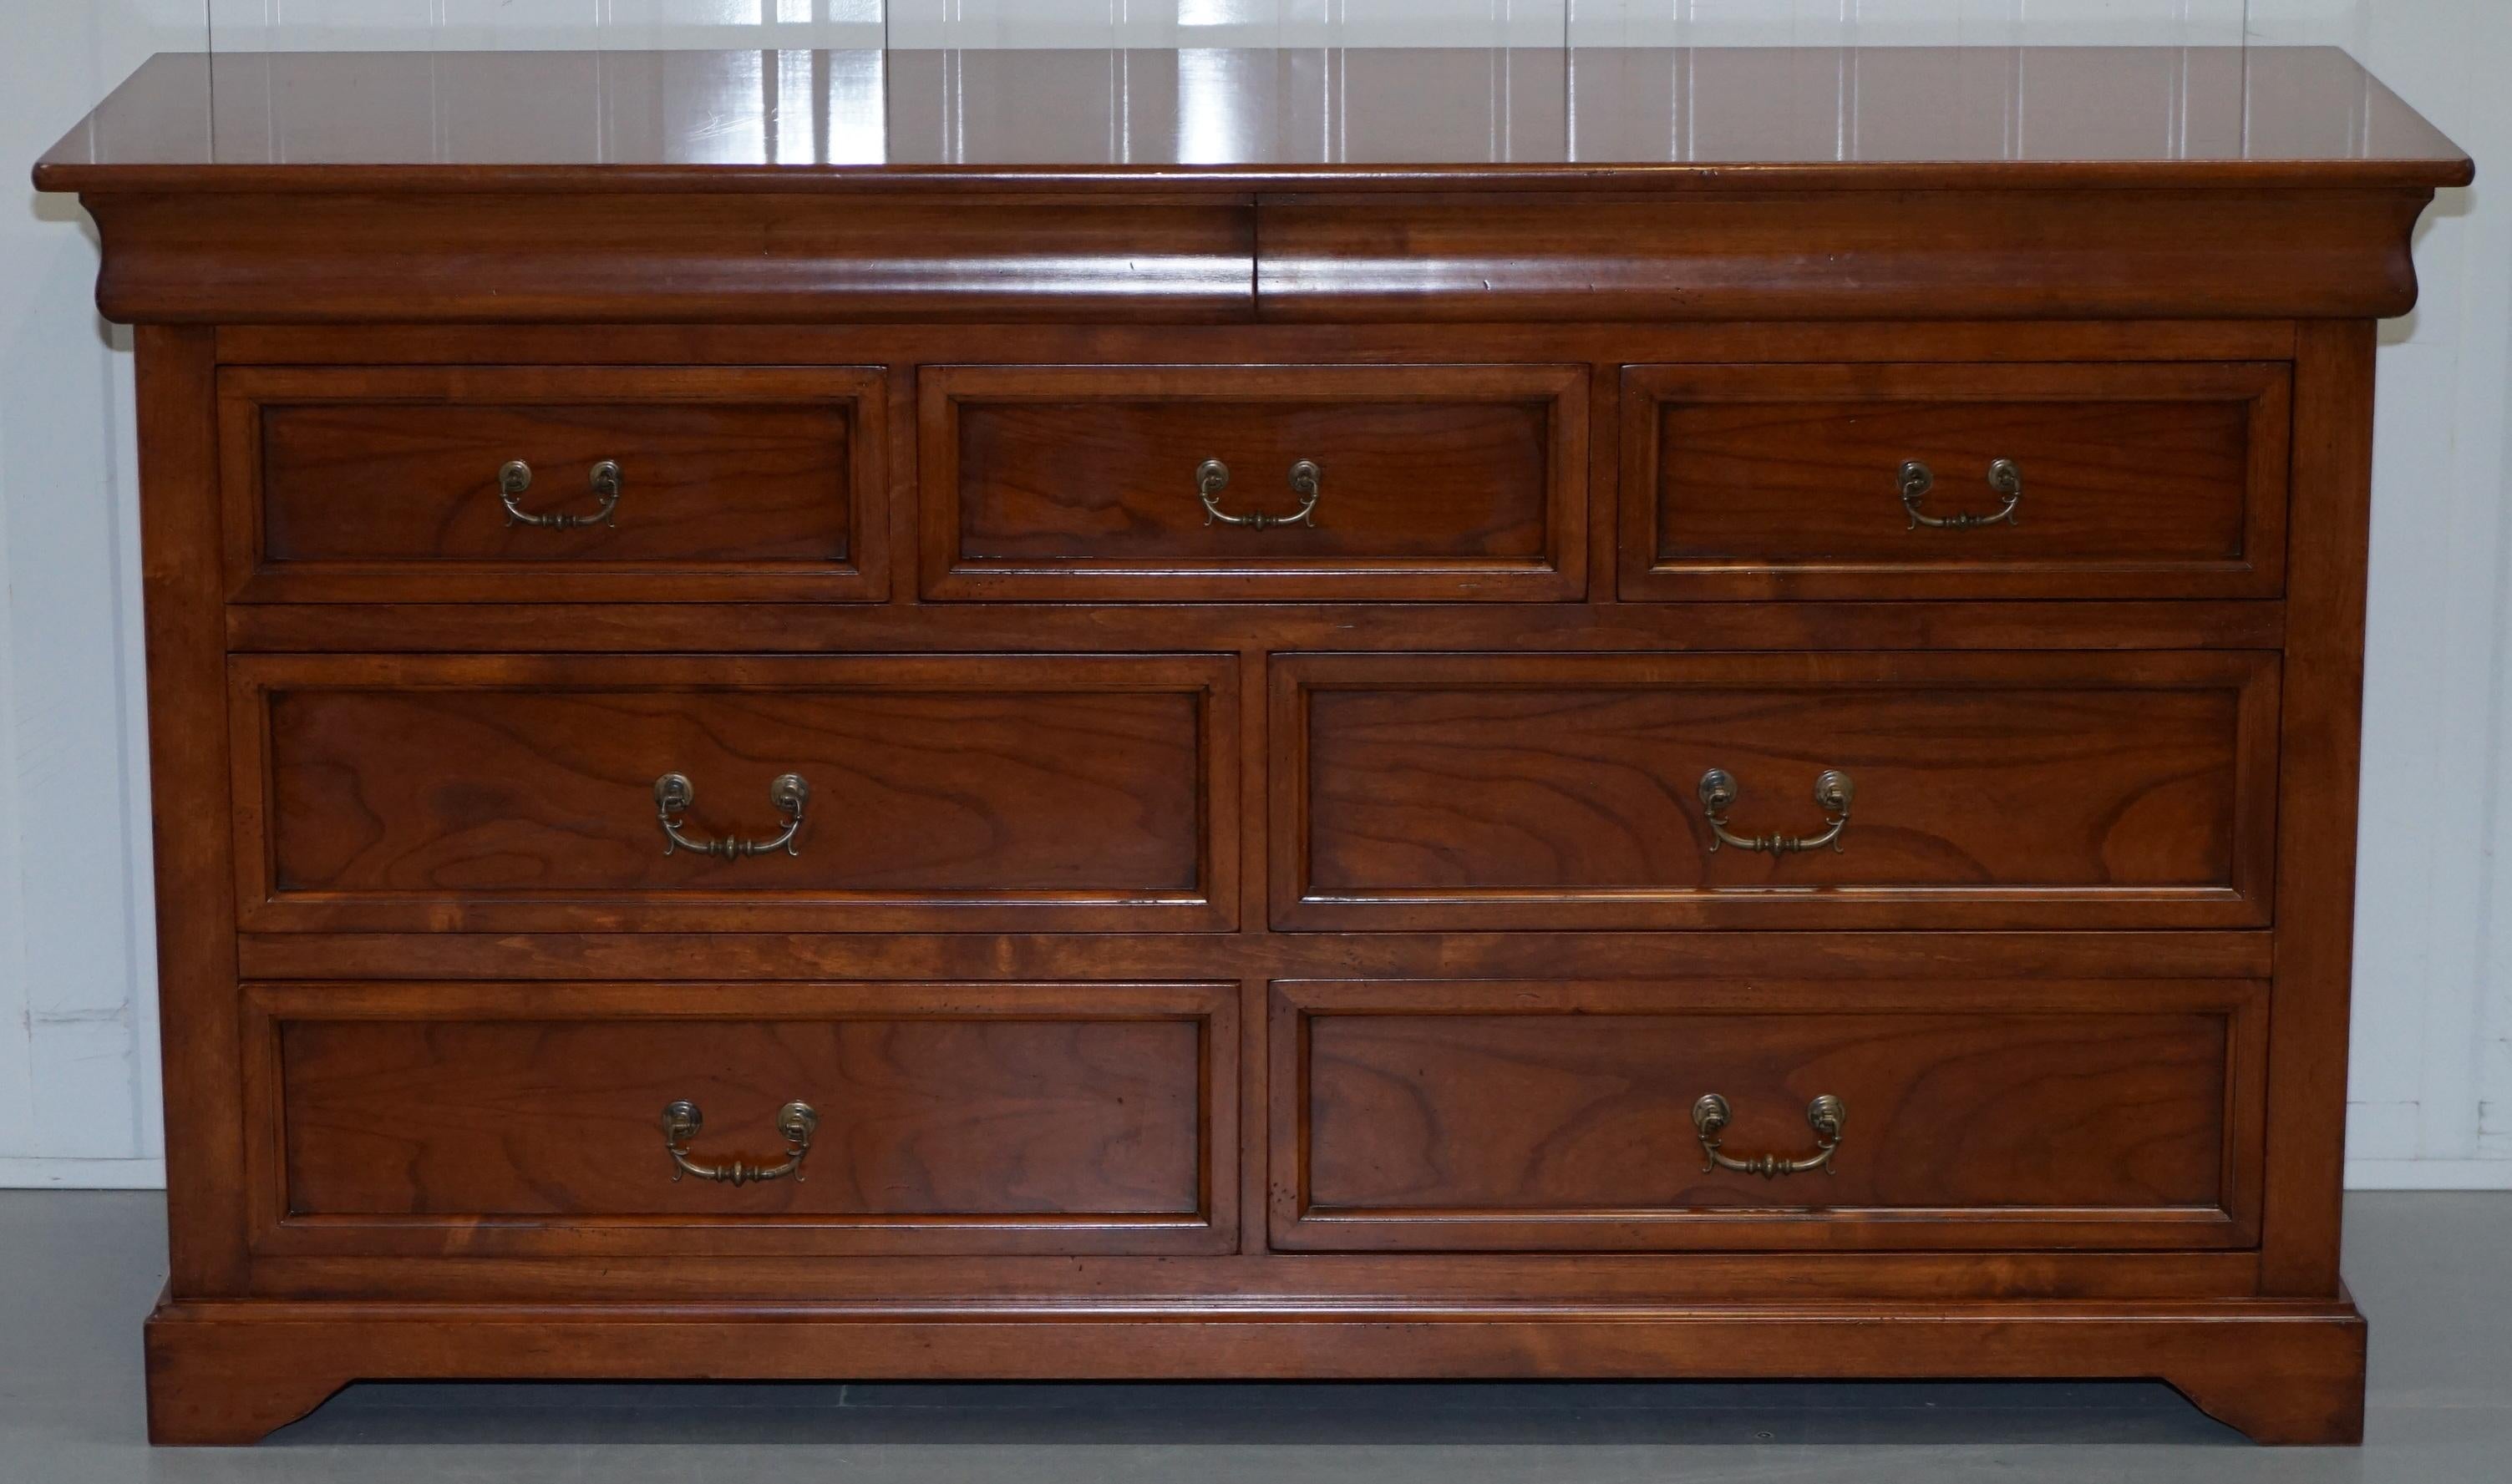 We are delighted to offer for sale this lovely handmade in Italy from brown oak by Consorzio Mobili sideboard sized bank or chest of drawers, part of a large suite

As mentioned this is part of a suite, I have the matching Tallboy chest of